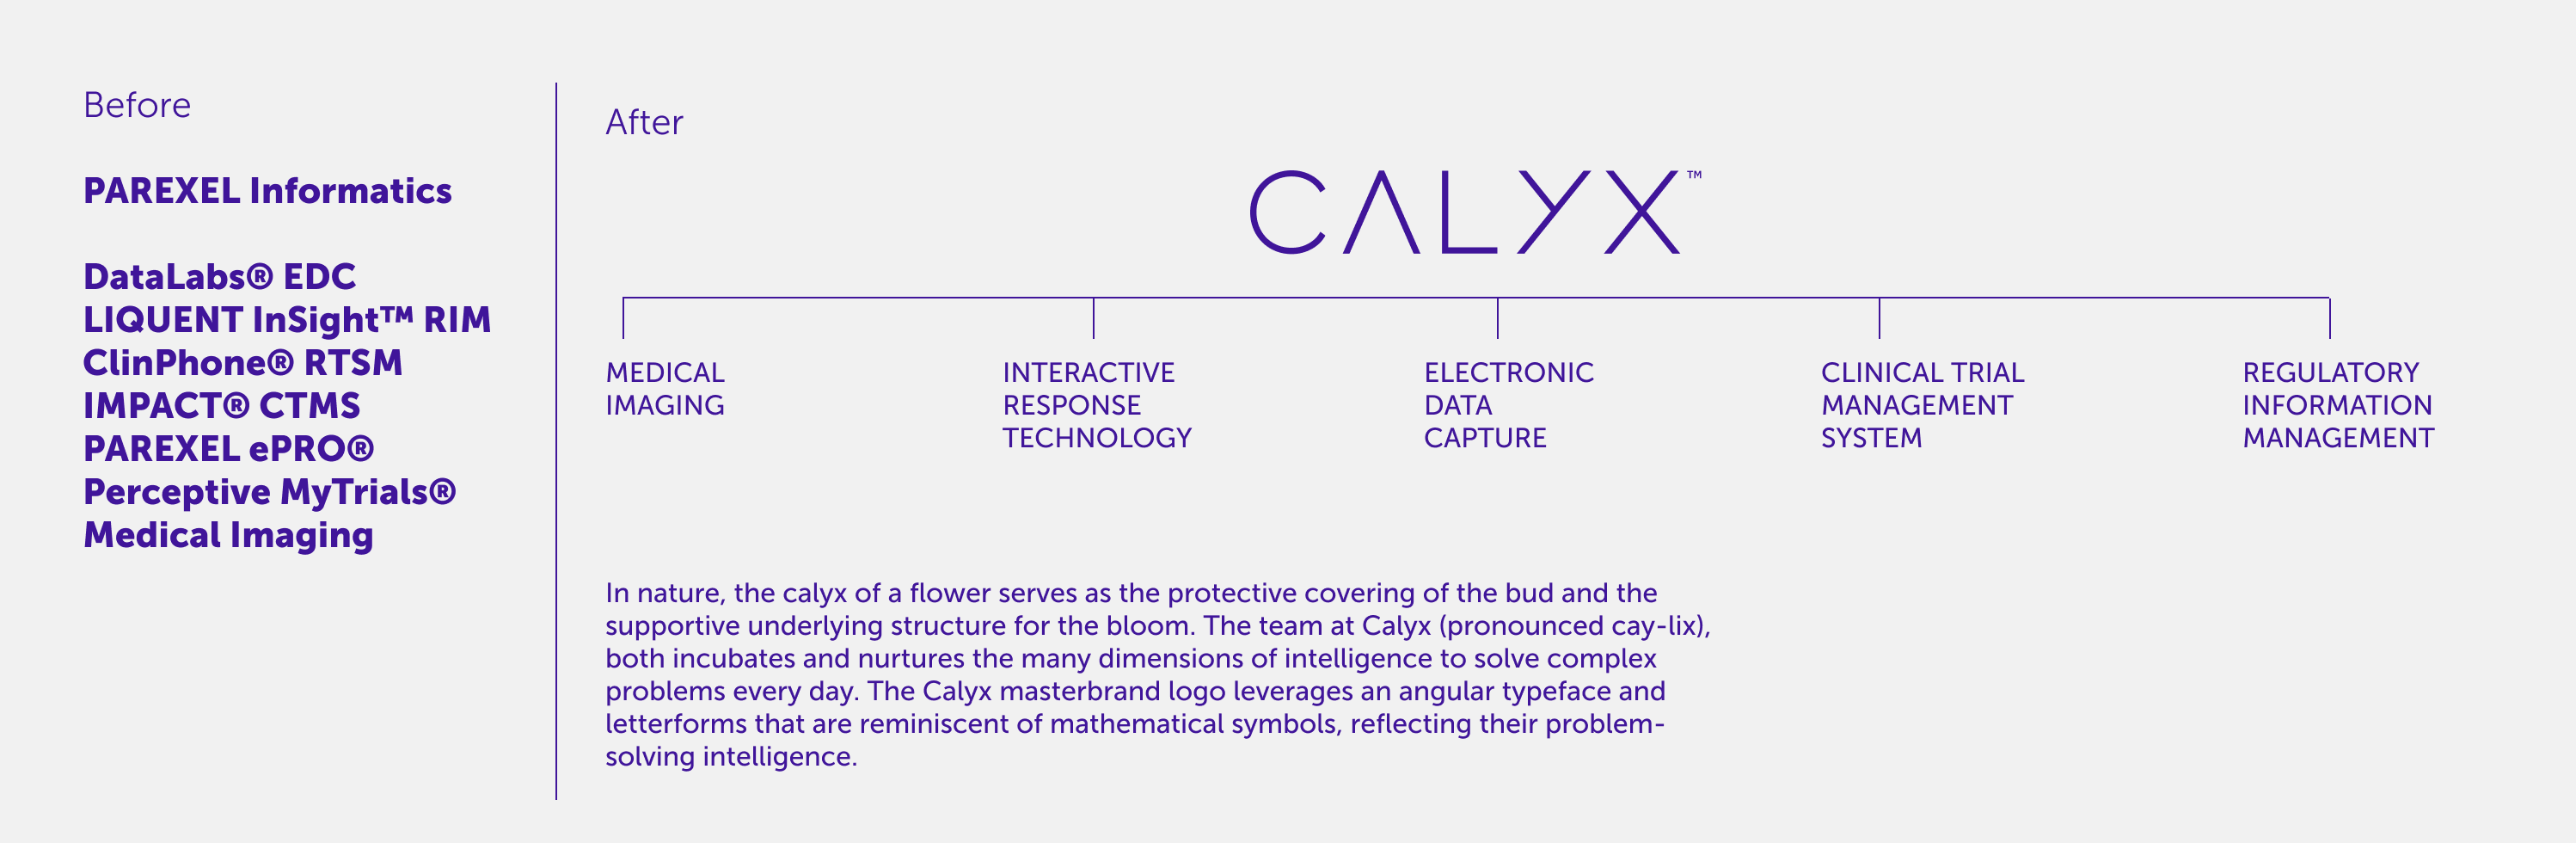 Calyx - Before and after